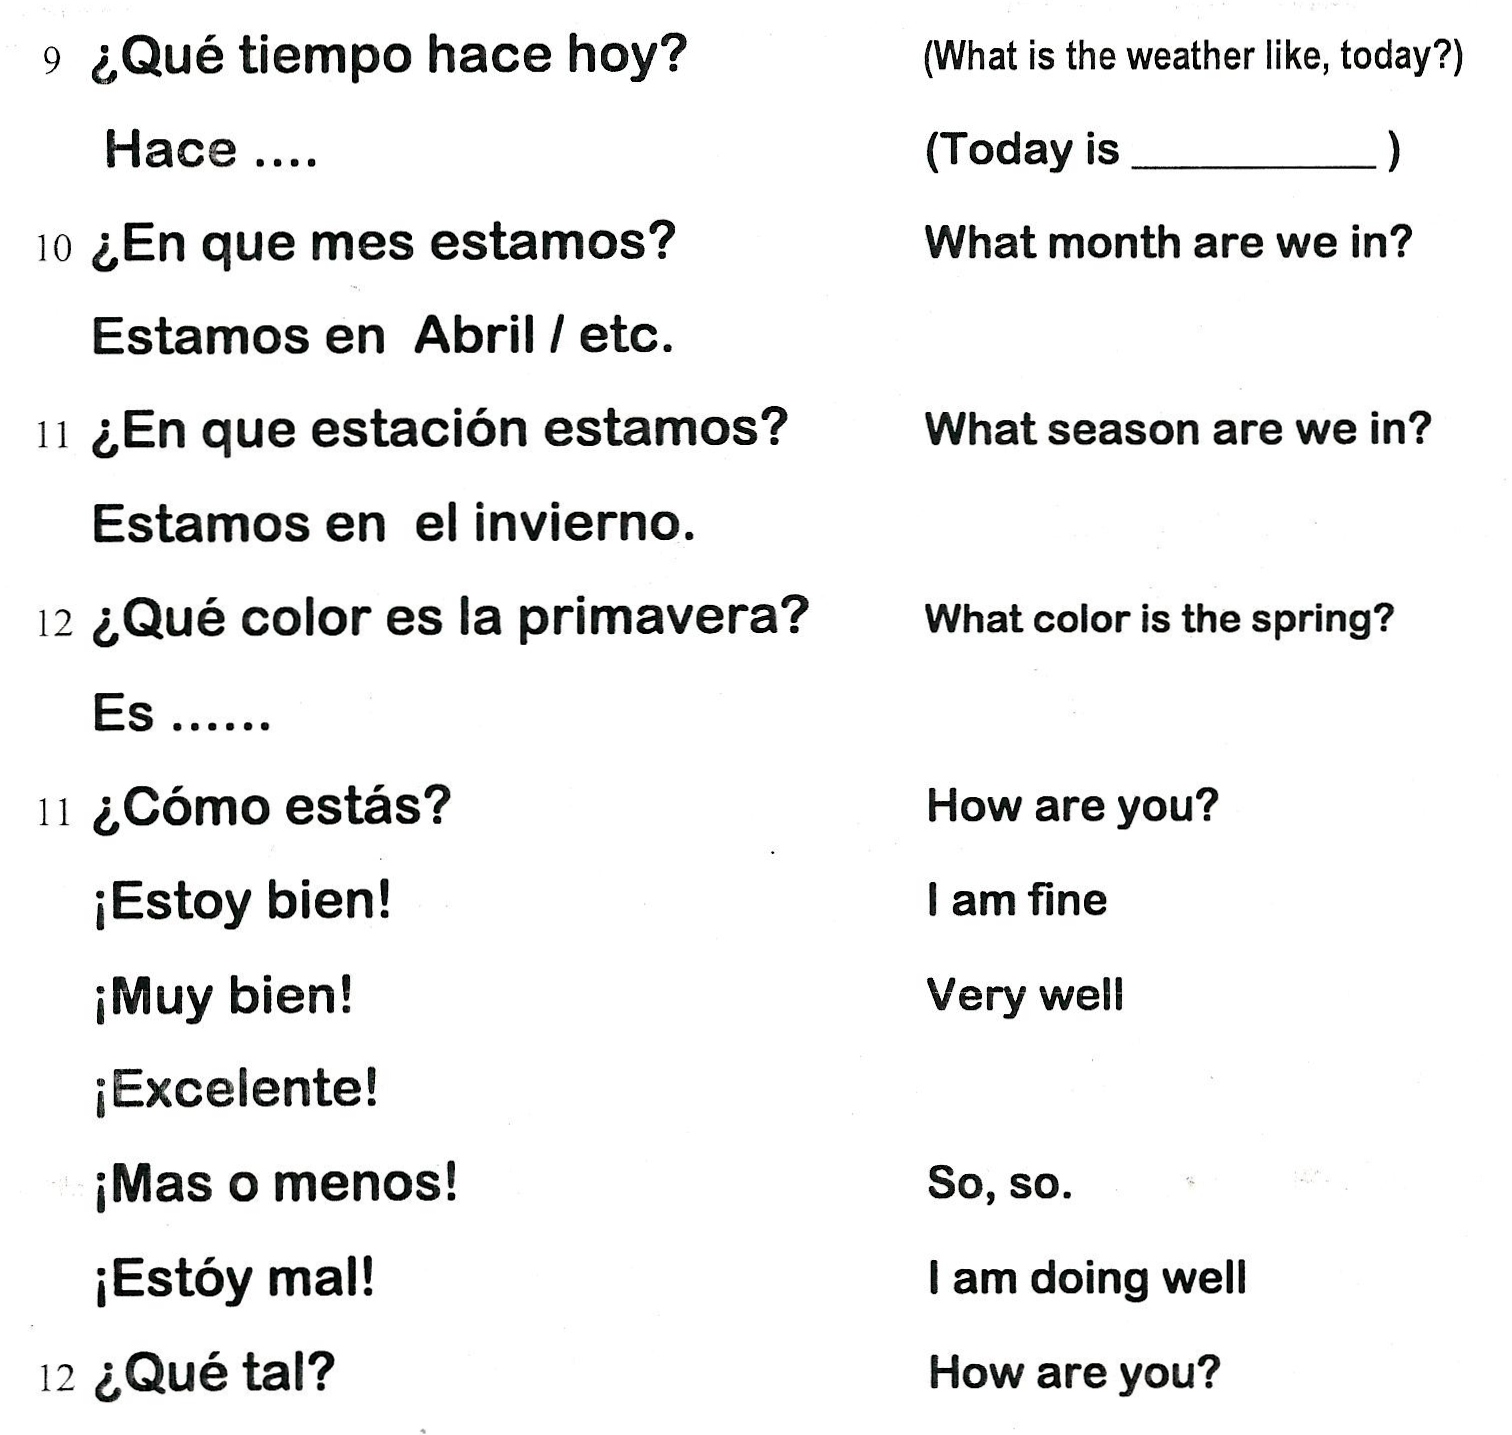 mrs-scott-s-spanish-1a-period-4-chapter-1-phrases